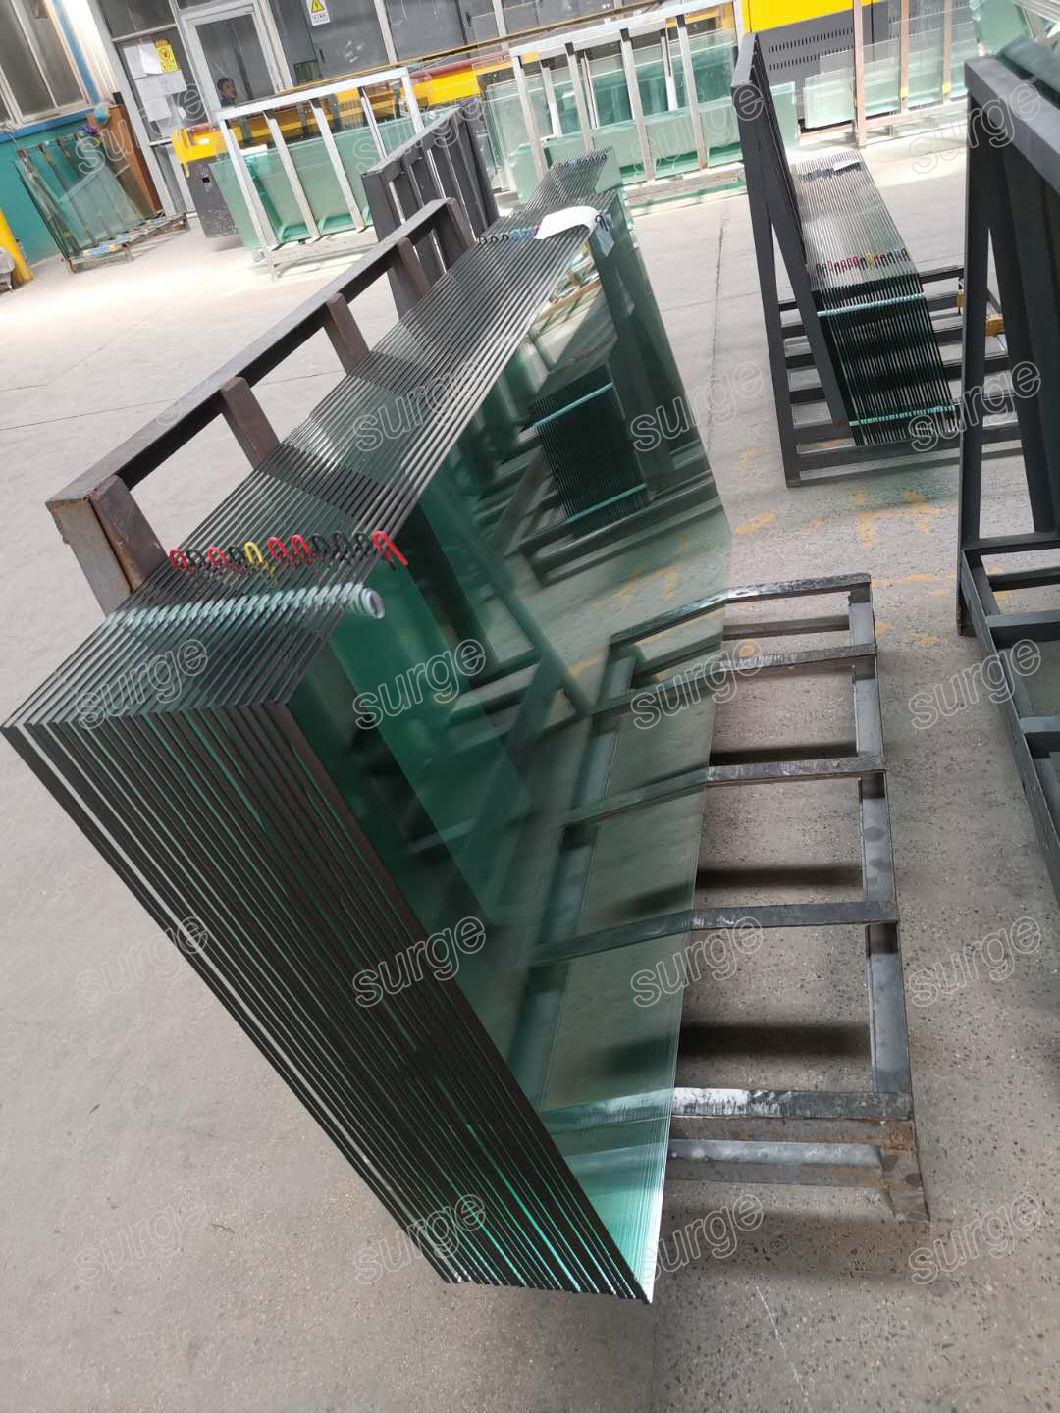 3mm Safety Clear Float Glass with Competitive Price